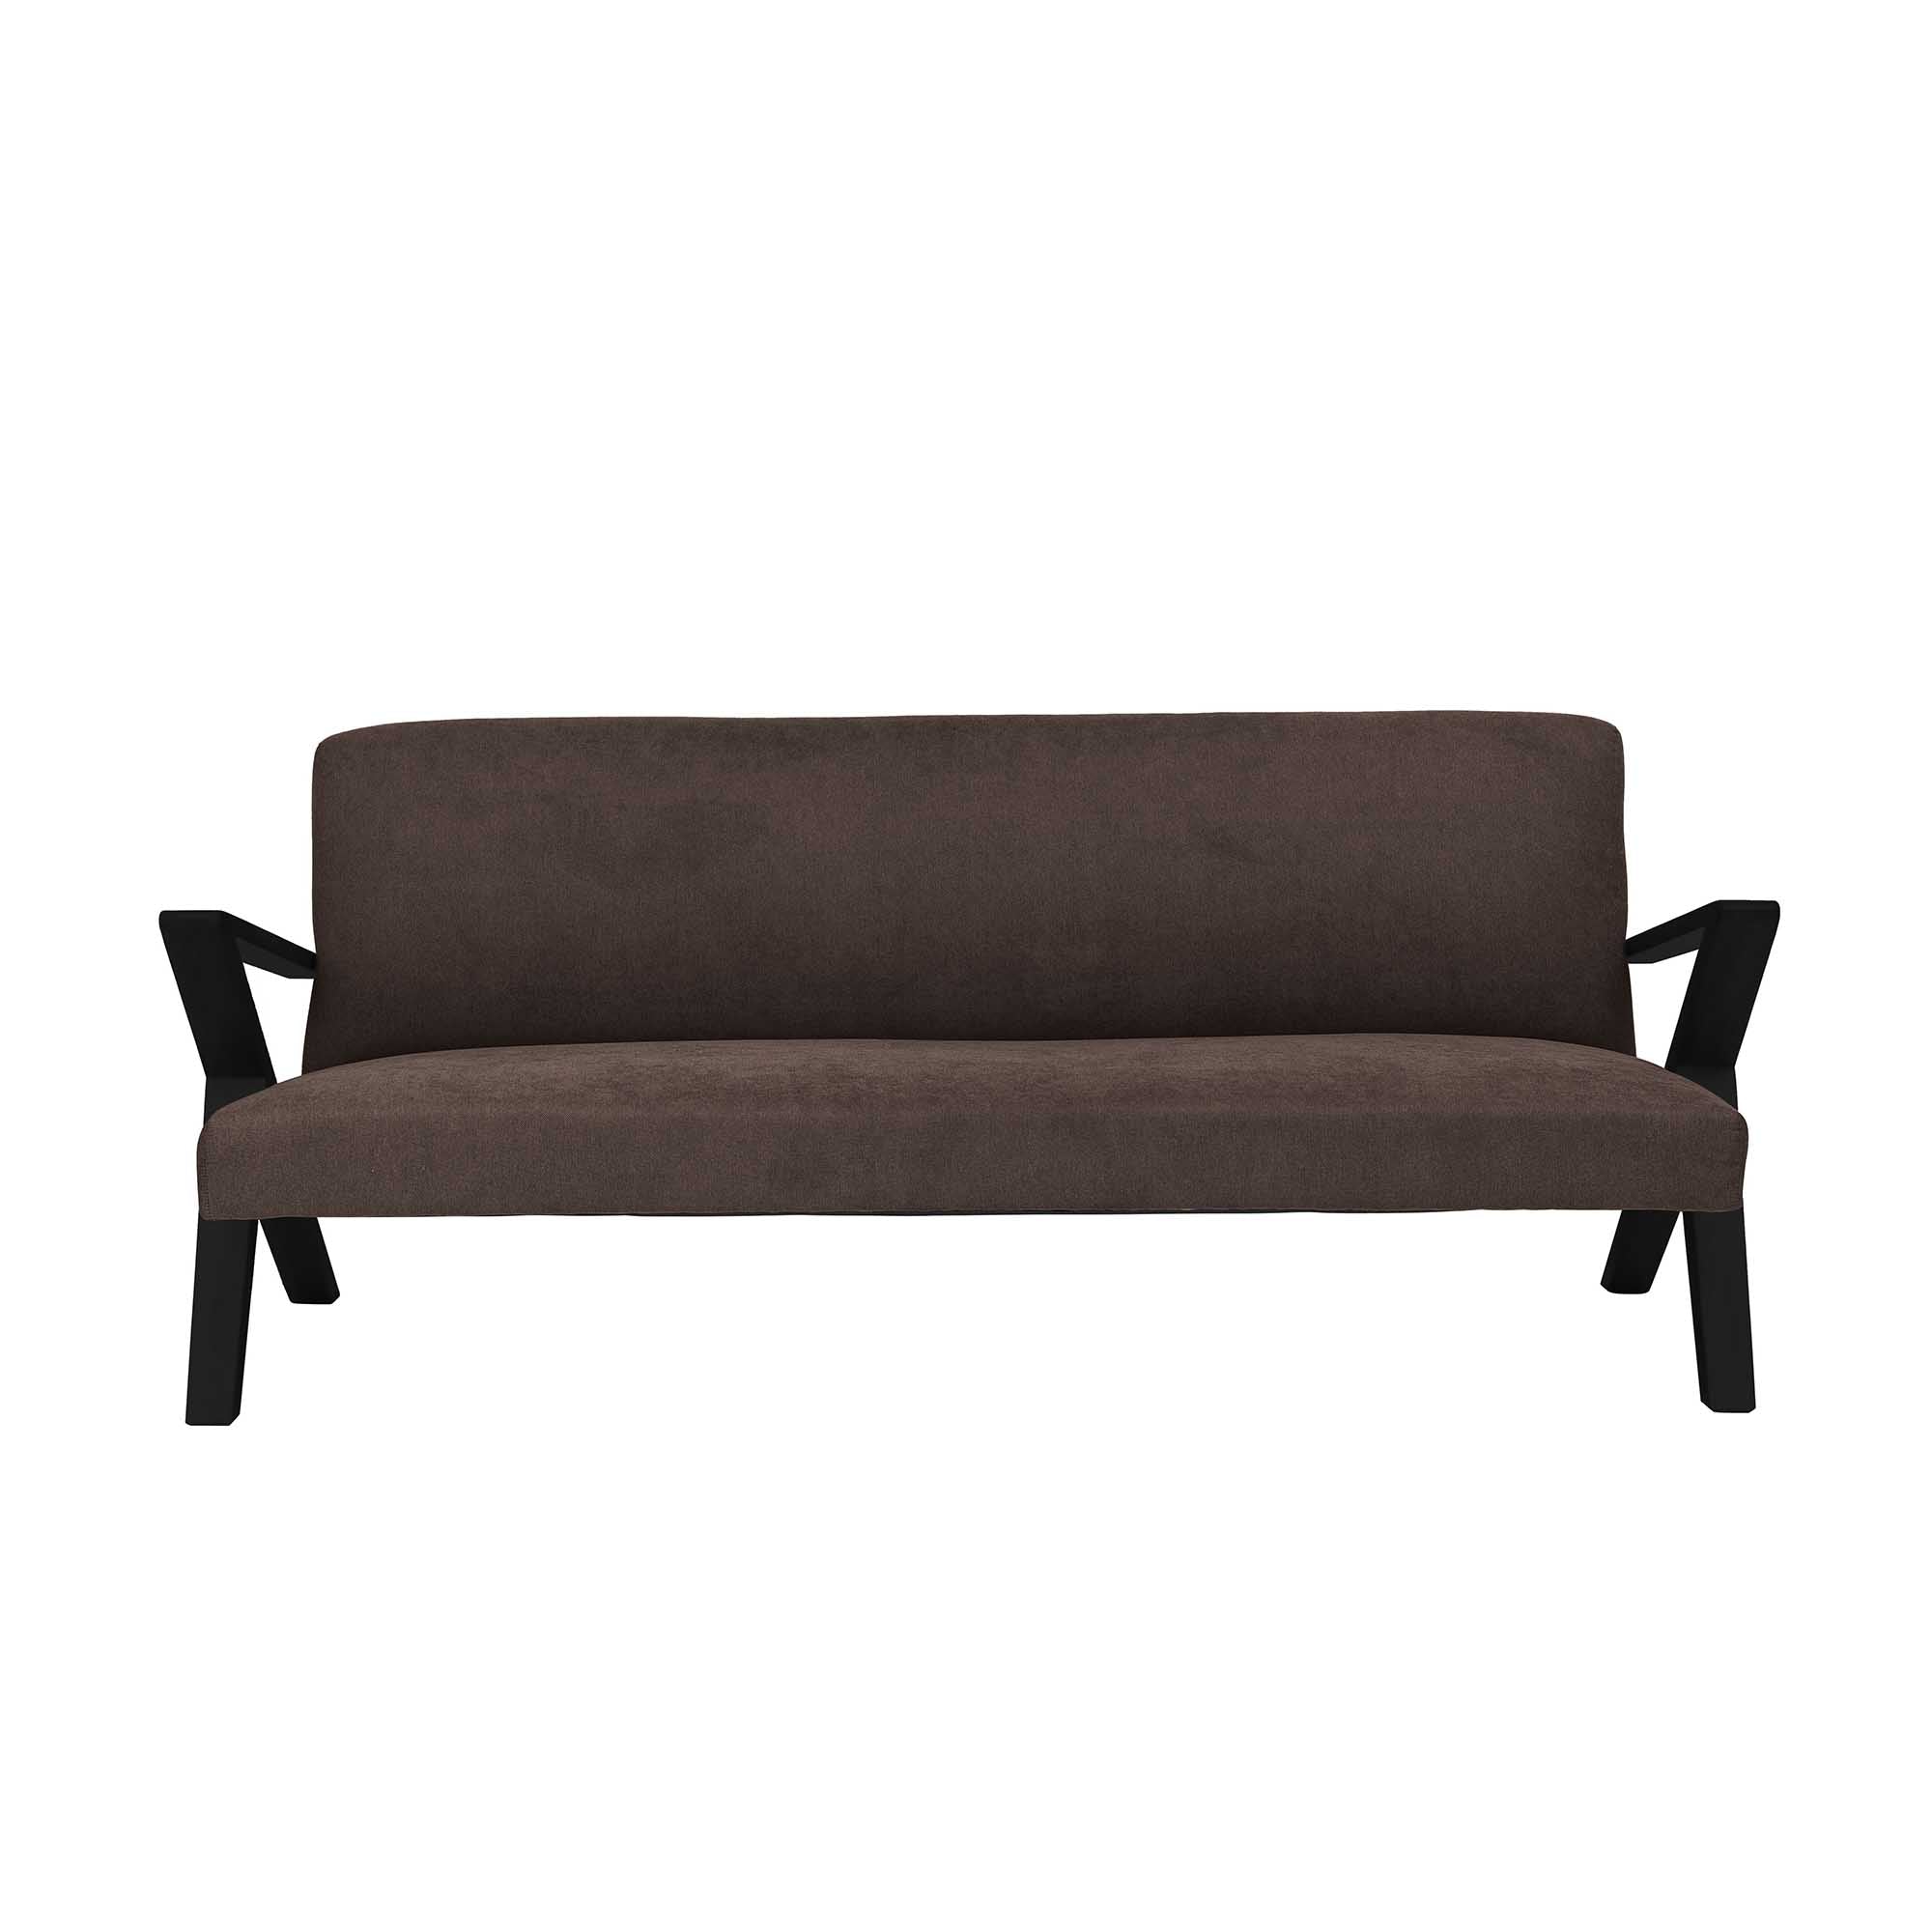  4-seater Sofa Beech Wood Frame, Black Lacquered grey fabric, front view